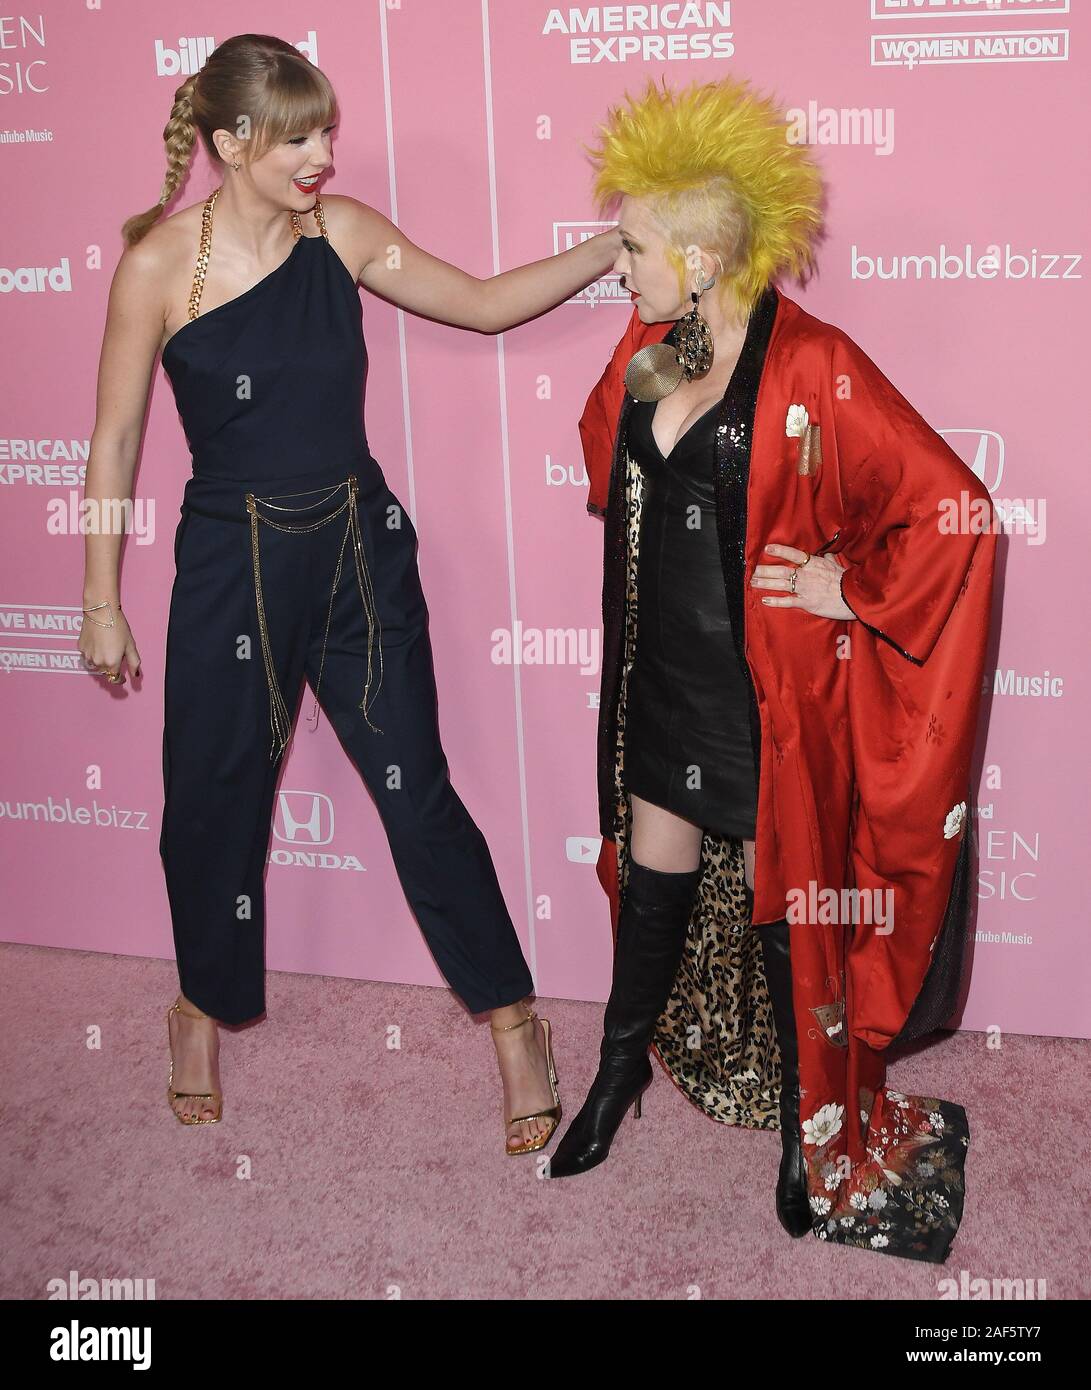 Los Angeles, USA. 12th Dec, 2019. (L-R) Taylor Swift and Cyndi Lauper at the 2019 Billboard Women in Music held at the Hollywood Palladium in Los Angeles, CA on Thursday, ?December 12, 2019. (Photo By Sthanlee B. Mirador/Sipa USA) Credit: Sipa USA/Alamy Live News Stock Photo